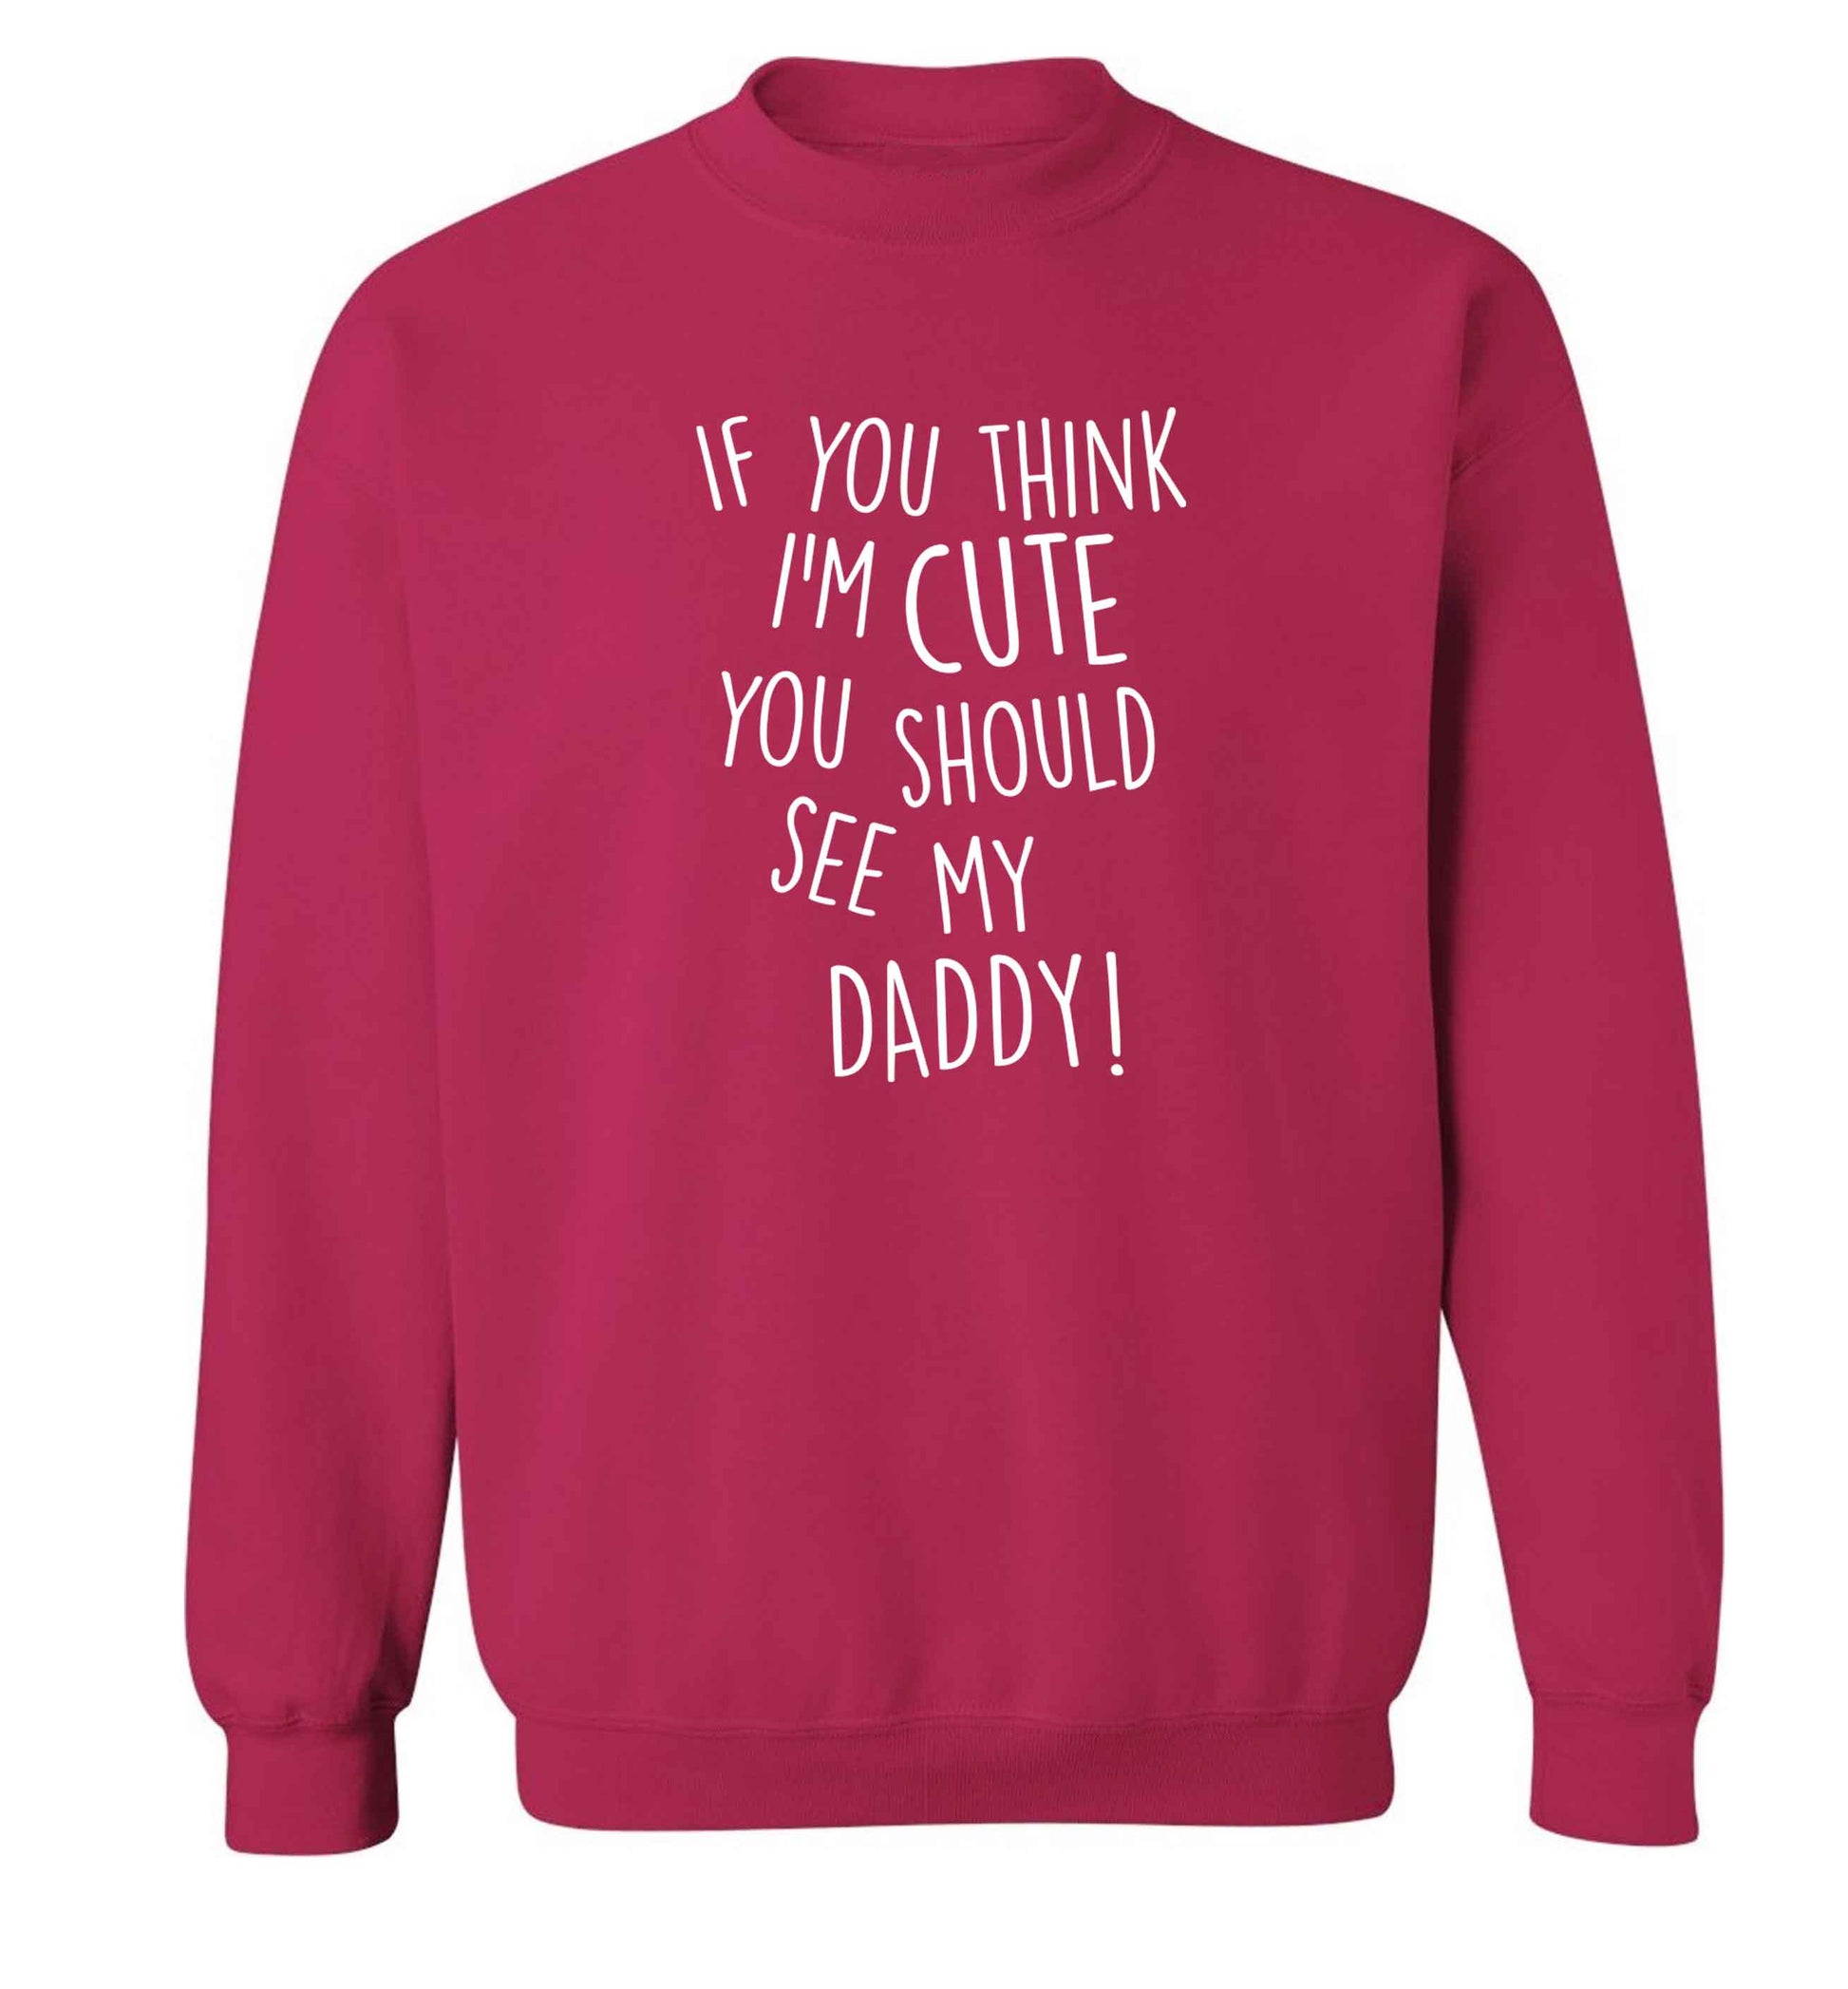 If you think I'm cute you should see my daddy adult's unisex pink sweater 2XL